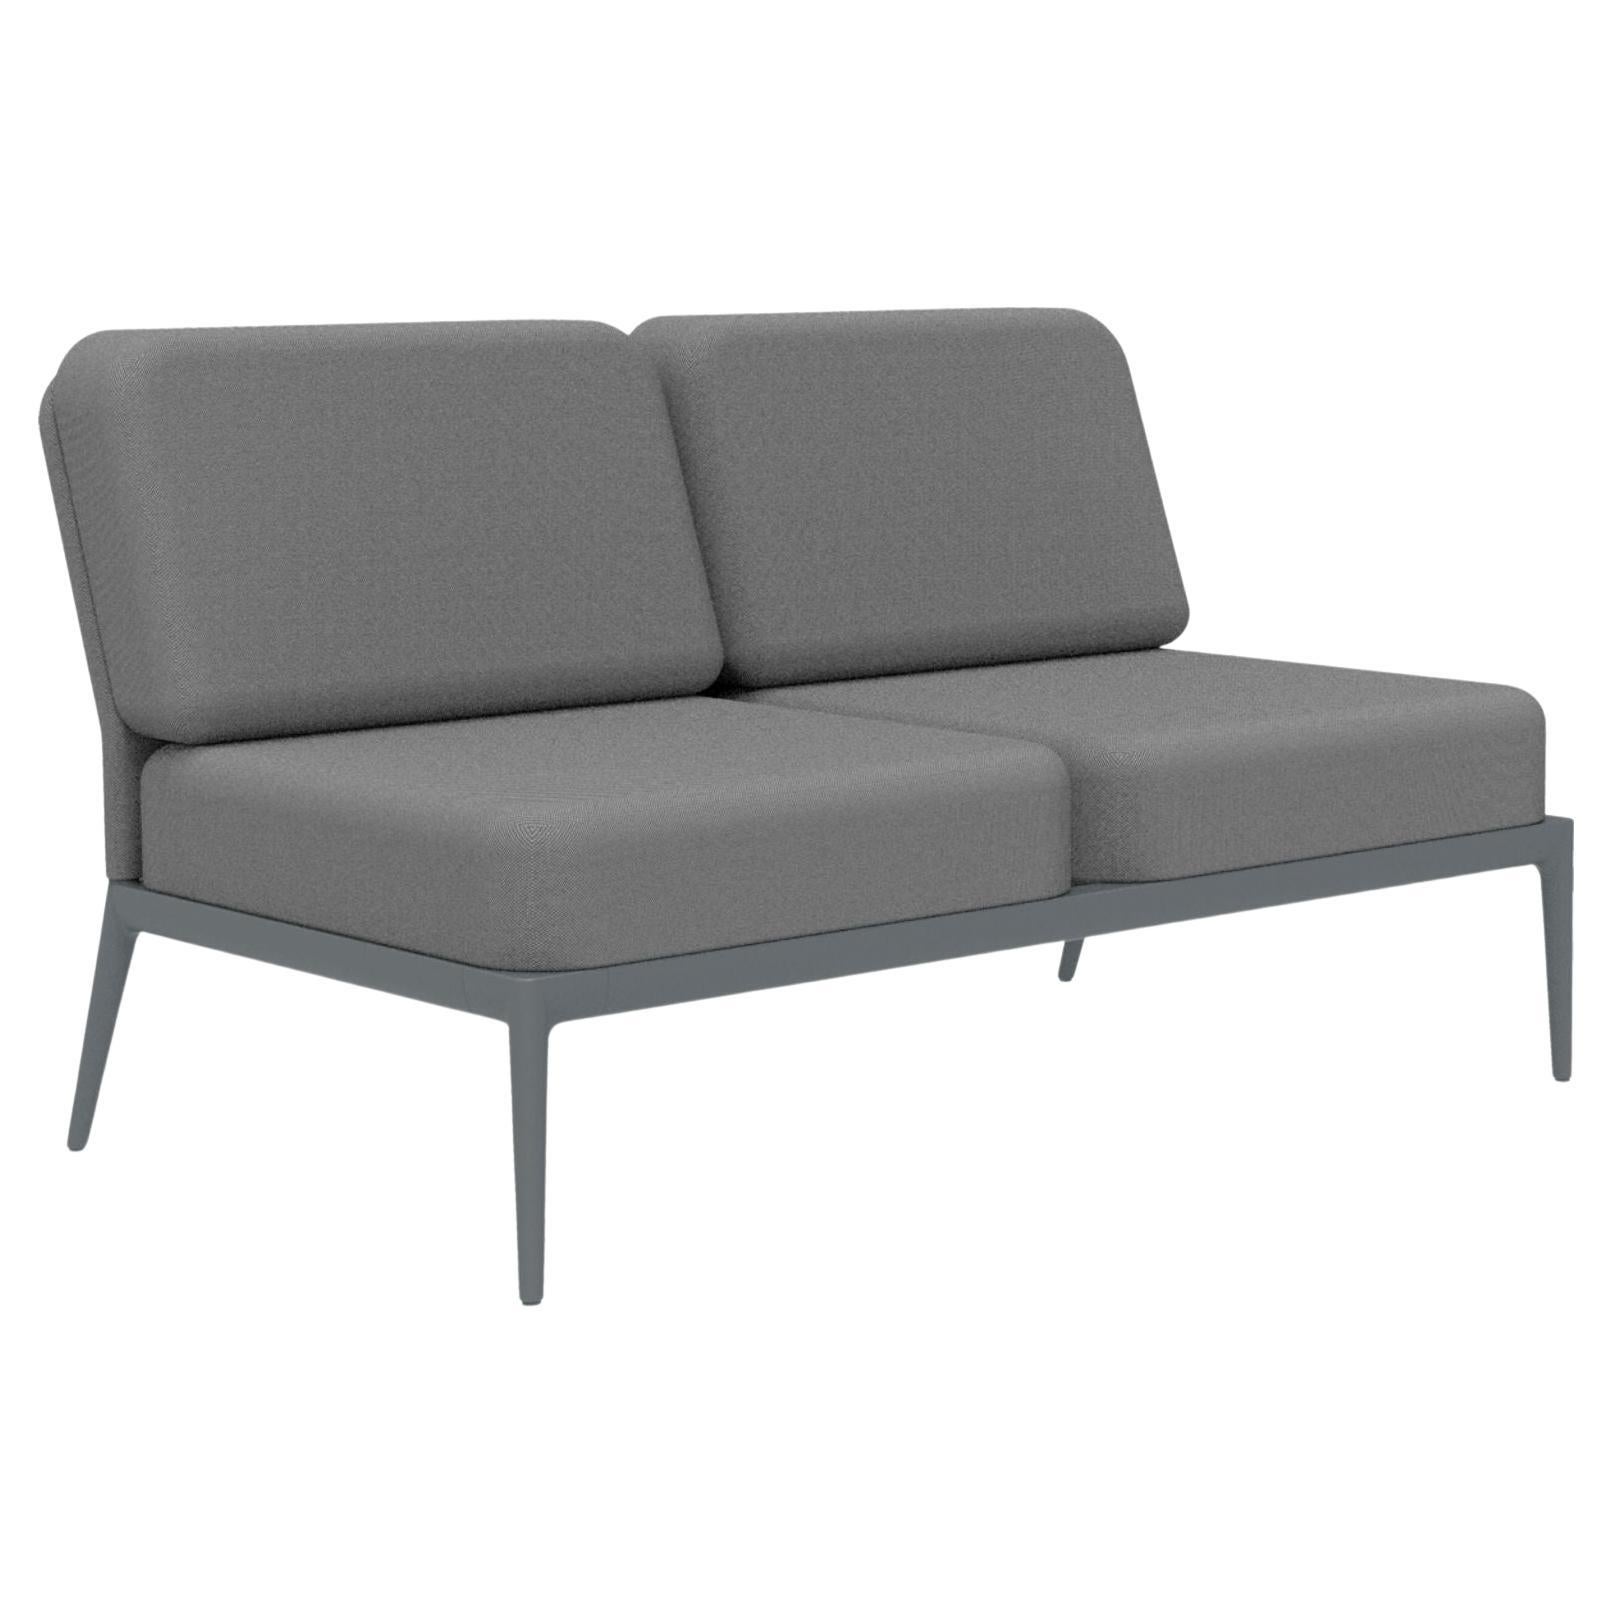 Cover Grey Double Central Modular Sofa by Mowee